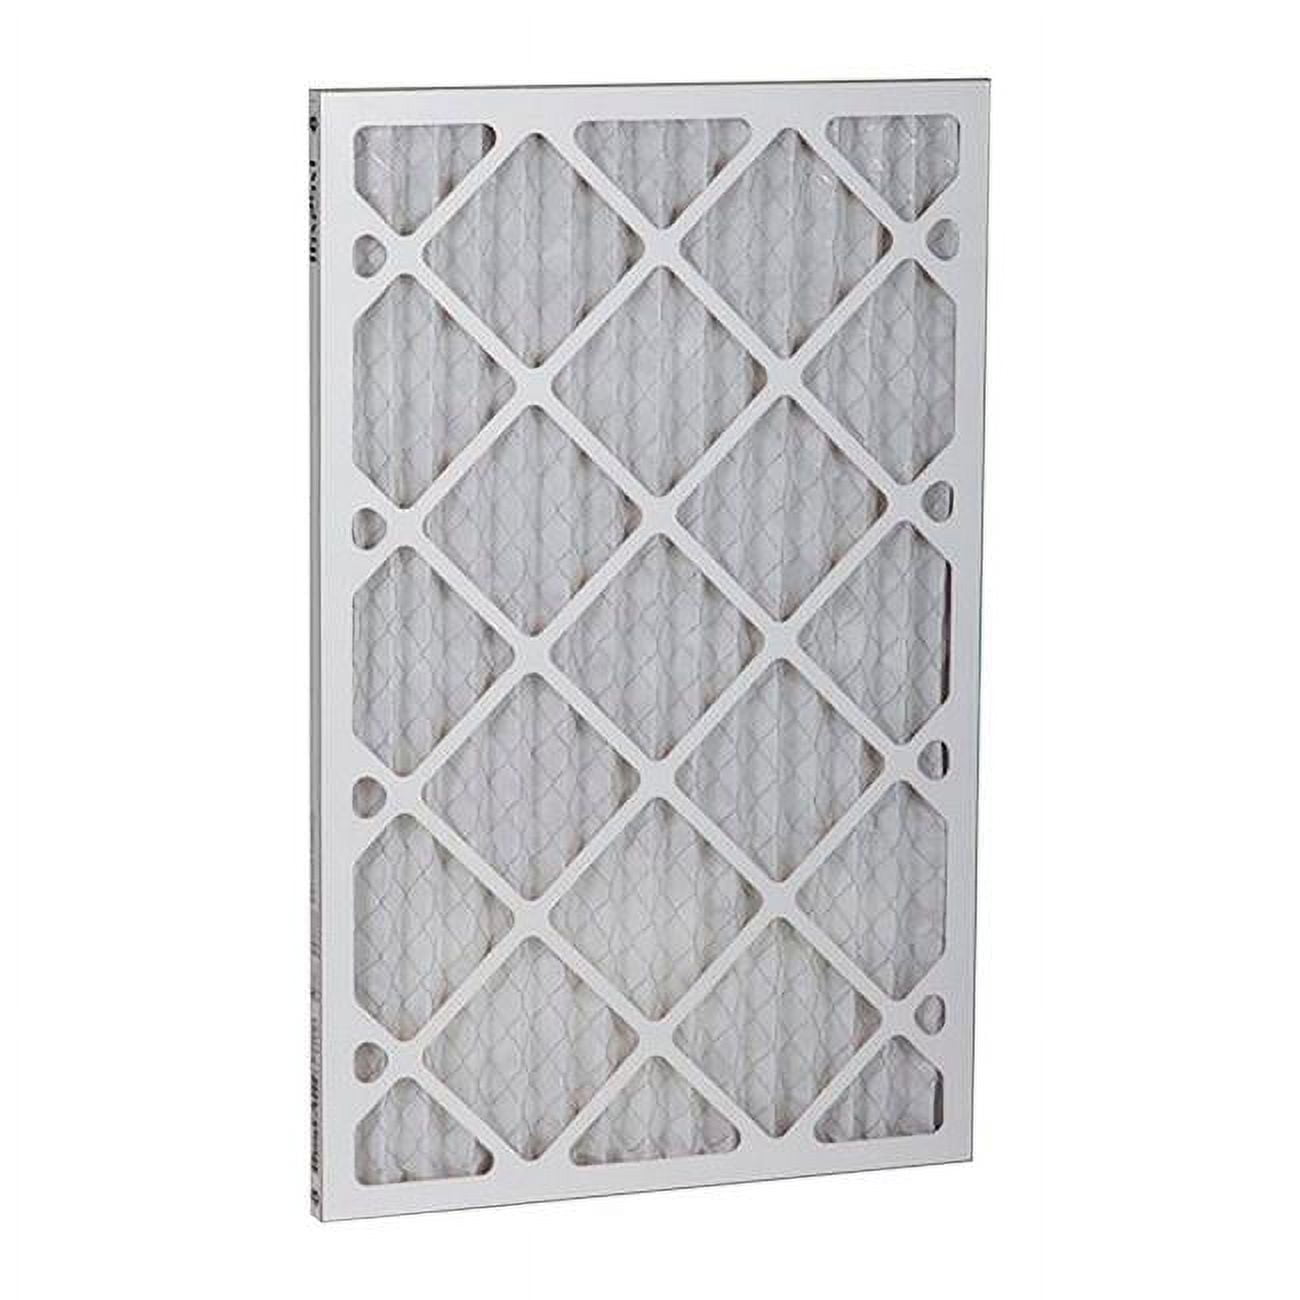 Picture of Bestair 4823035 24 x 18 x 1 in. 8 MERV Pleated Air Filter - Case of 12